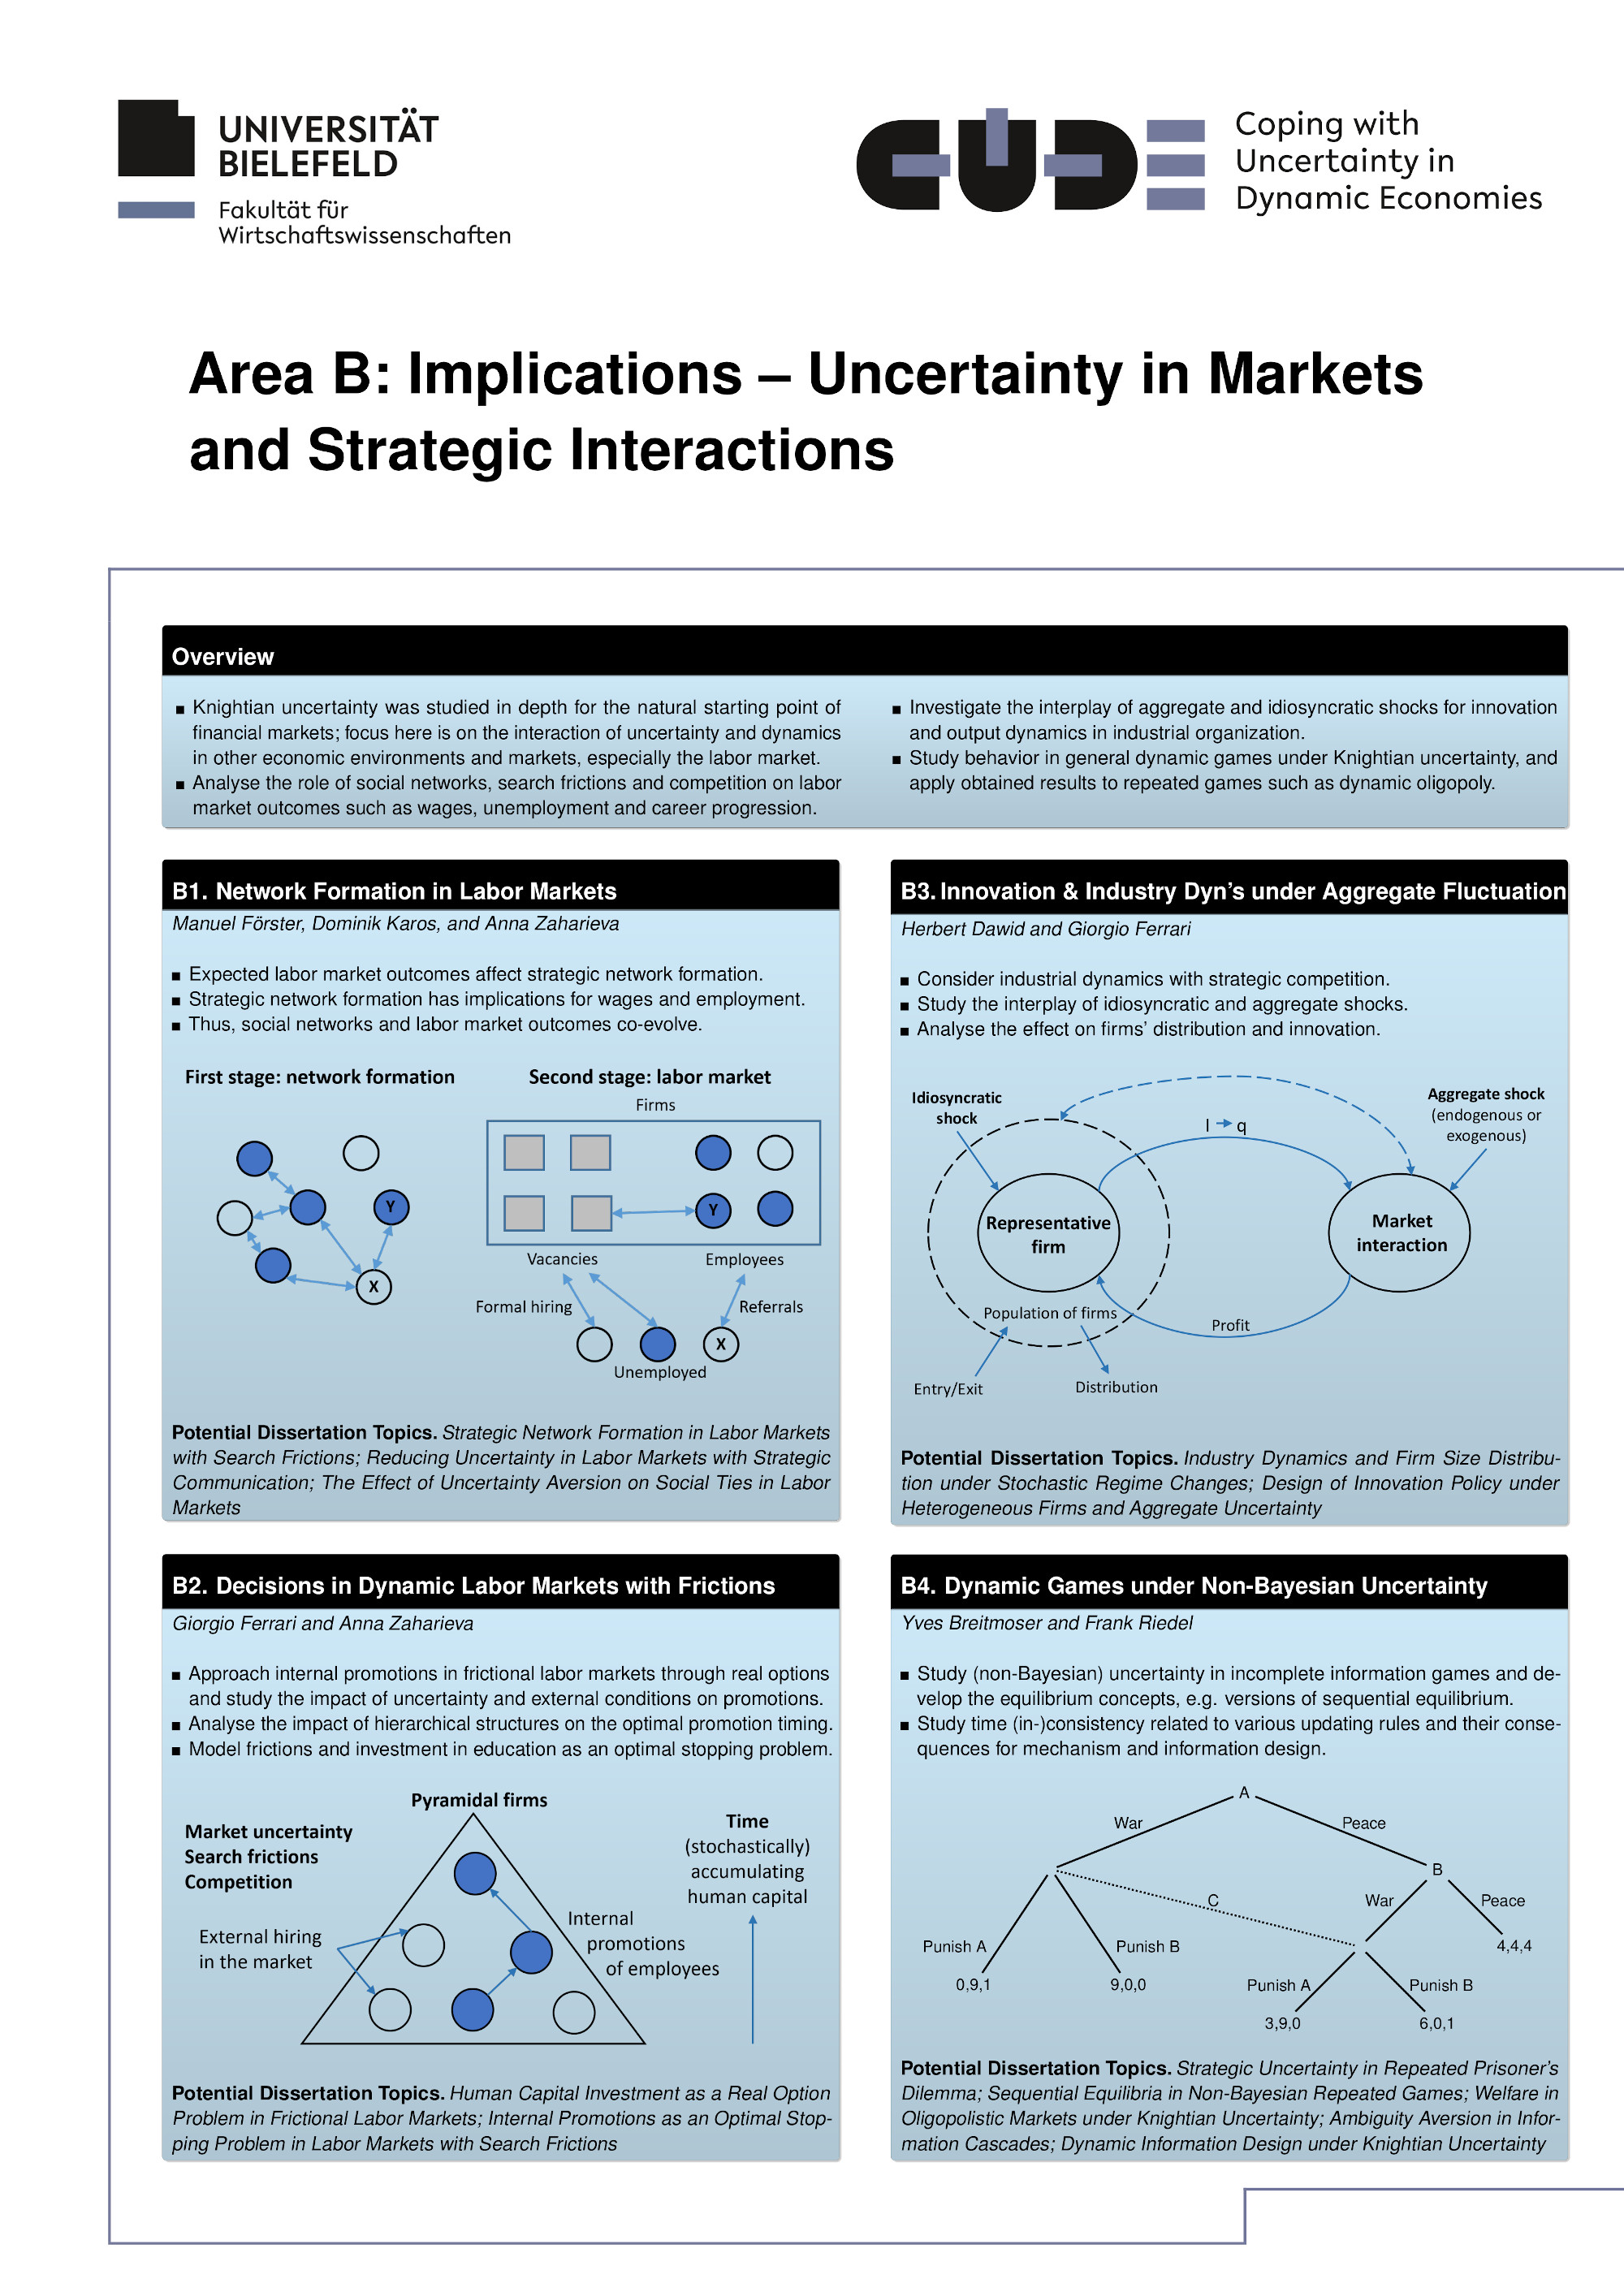 Poster for Research Area B.